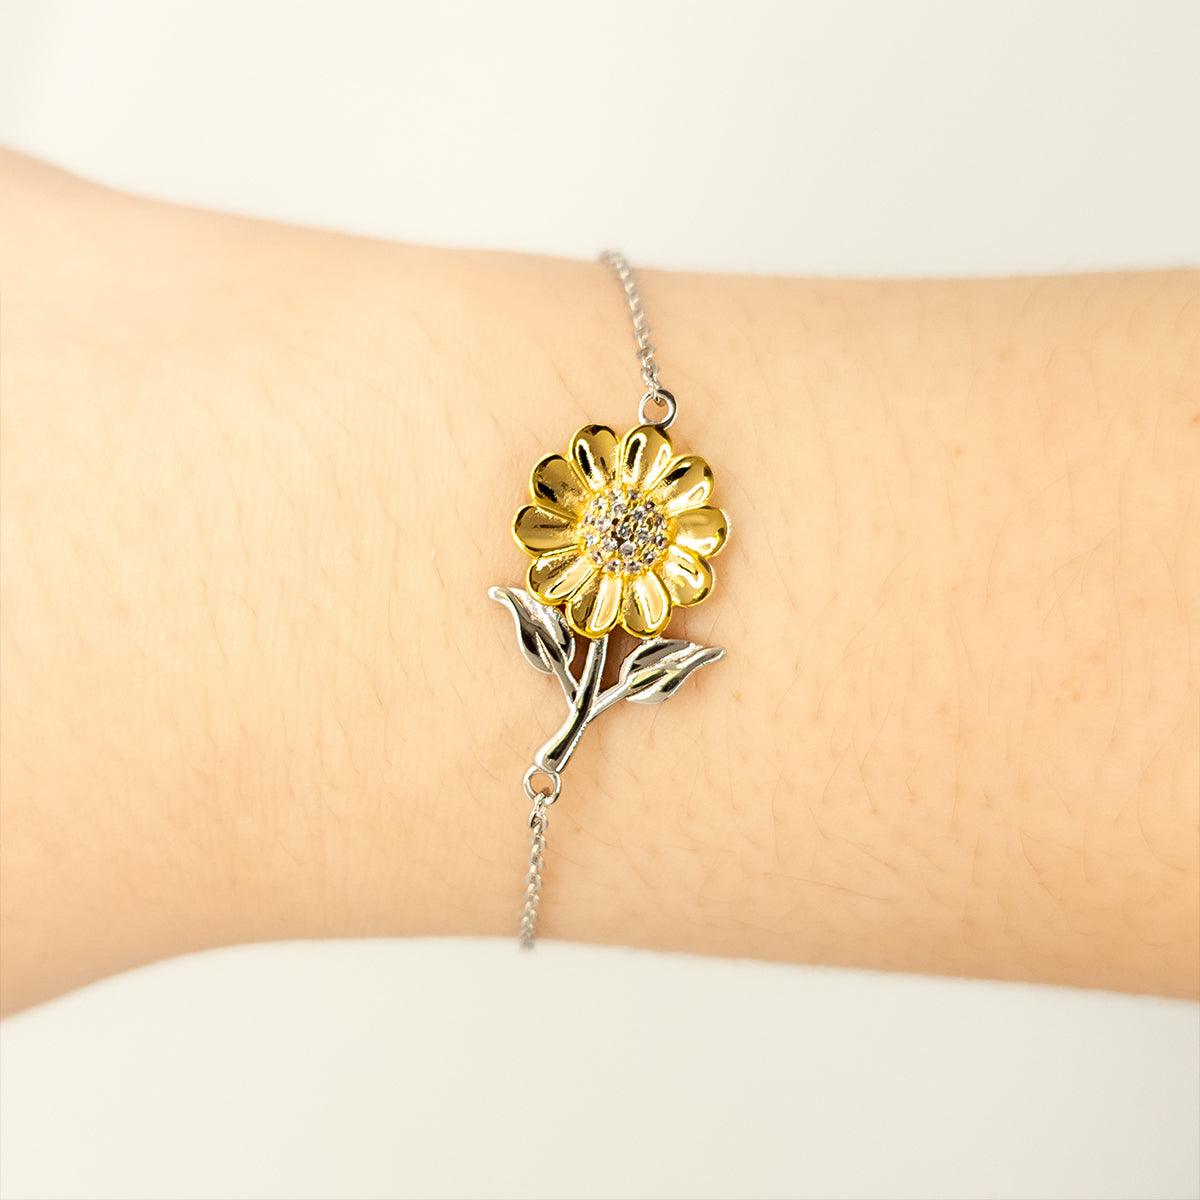 Clerk Sunflower Bracelet - Thanks for being who you are - Birthday Christmas Jewelry Gifts Coworkers Colleague Boss - Mallard Moon Gift Shop